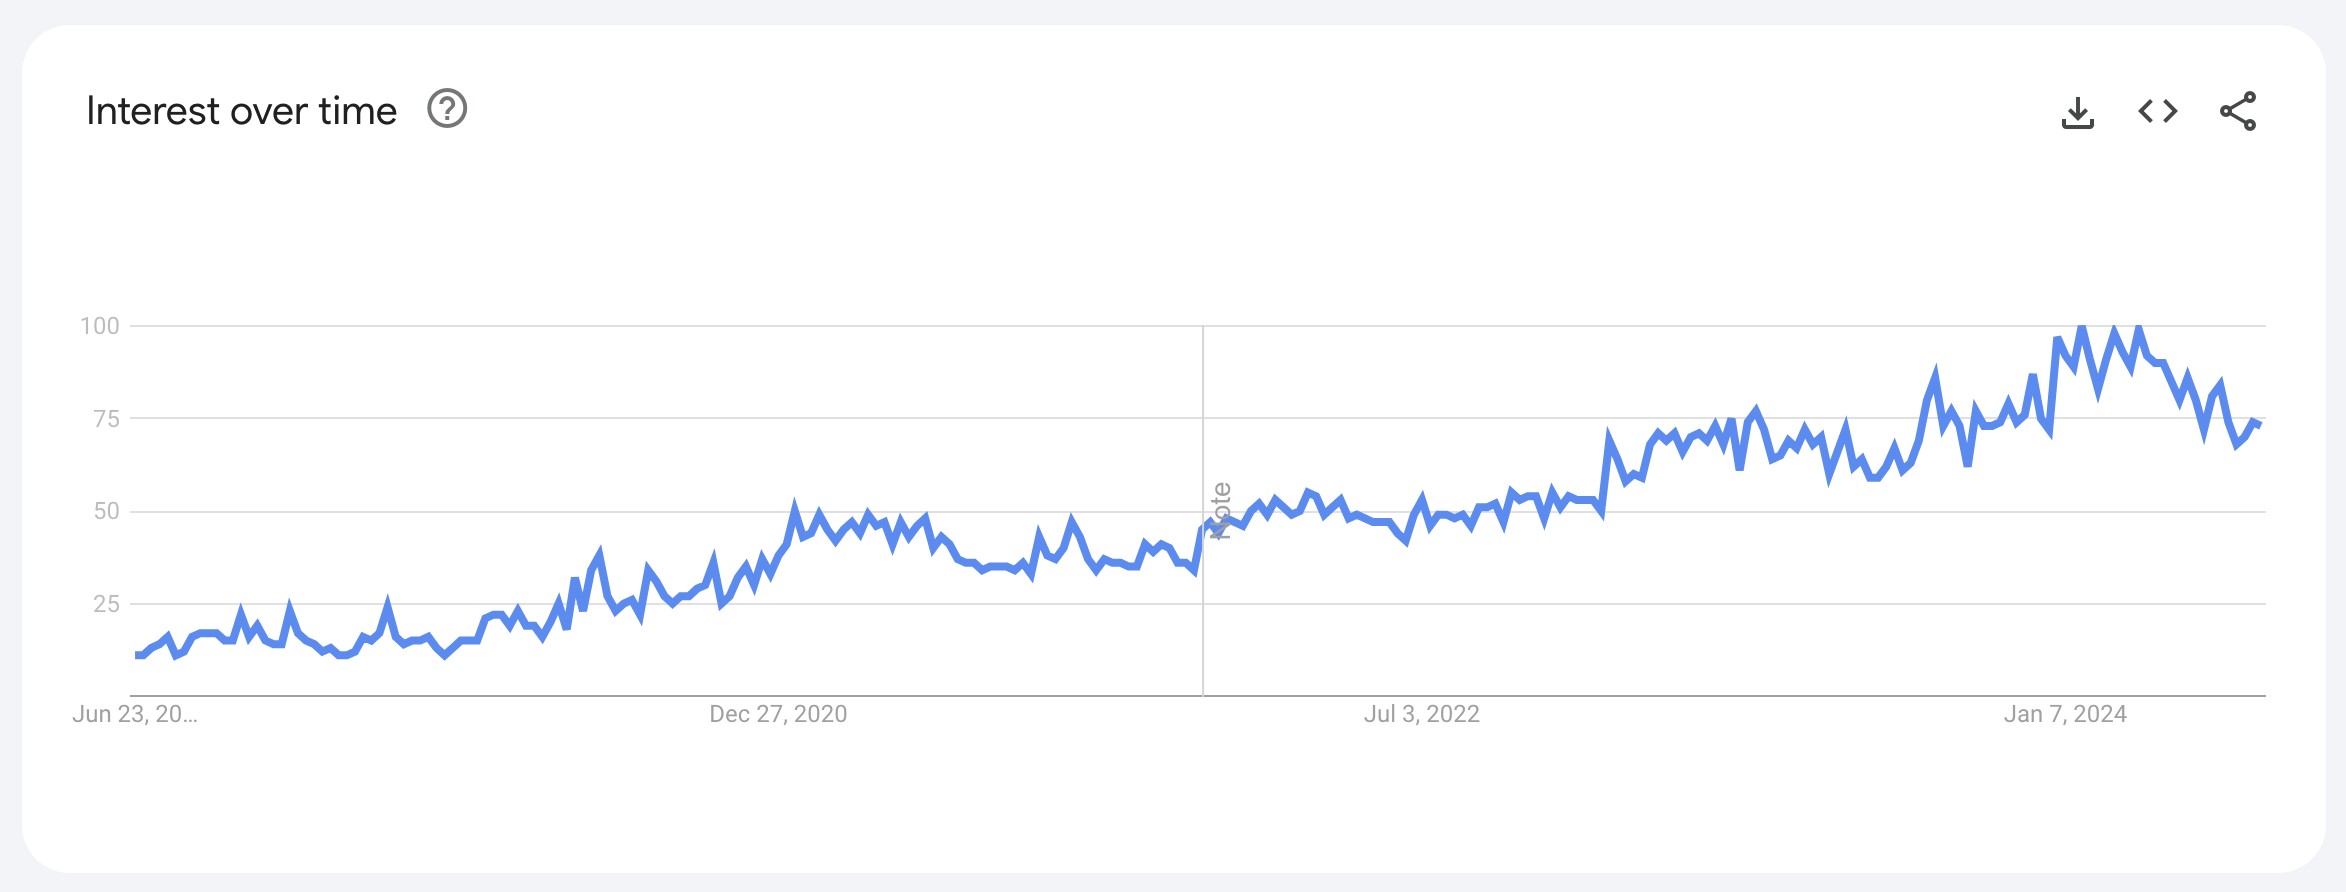 Niche market discovery resource called Google Trends